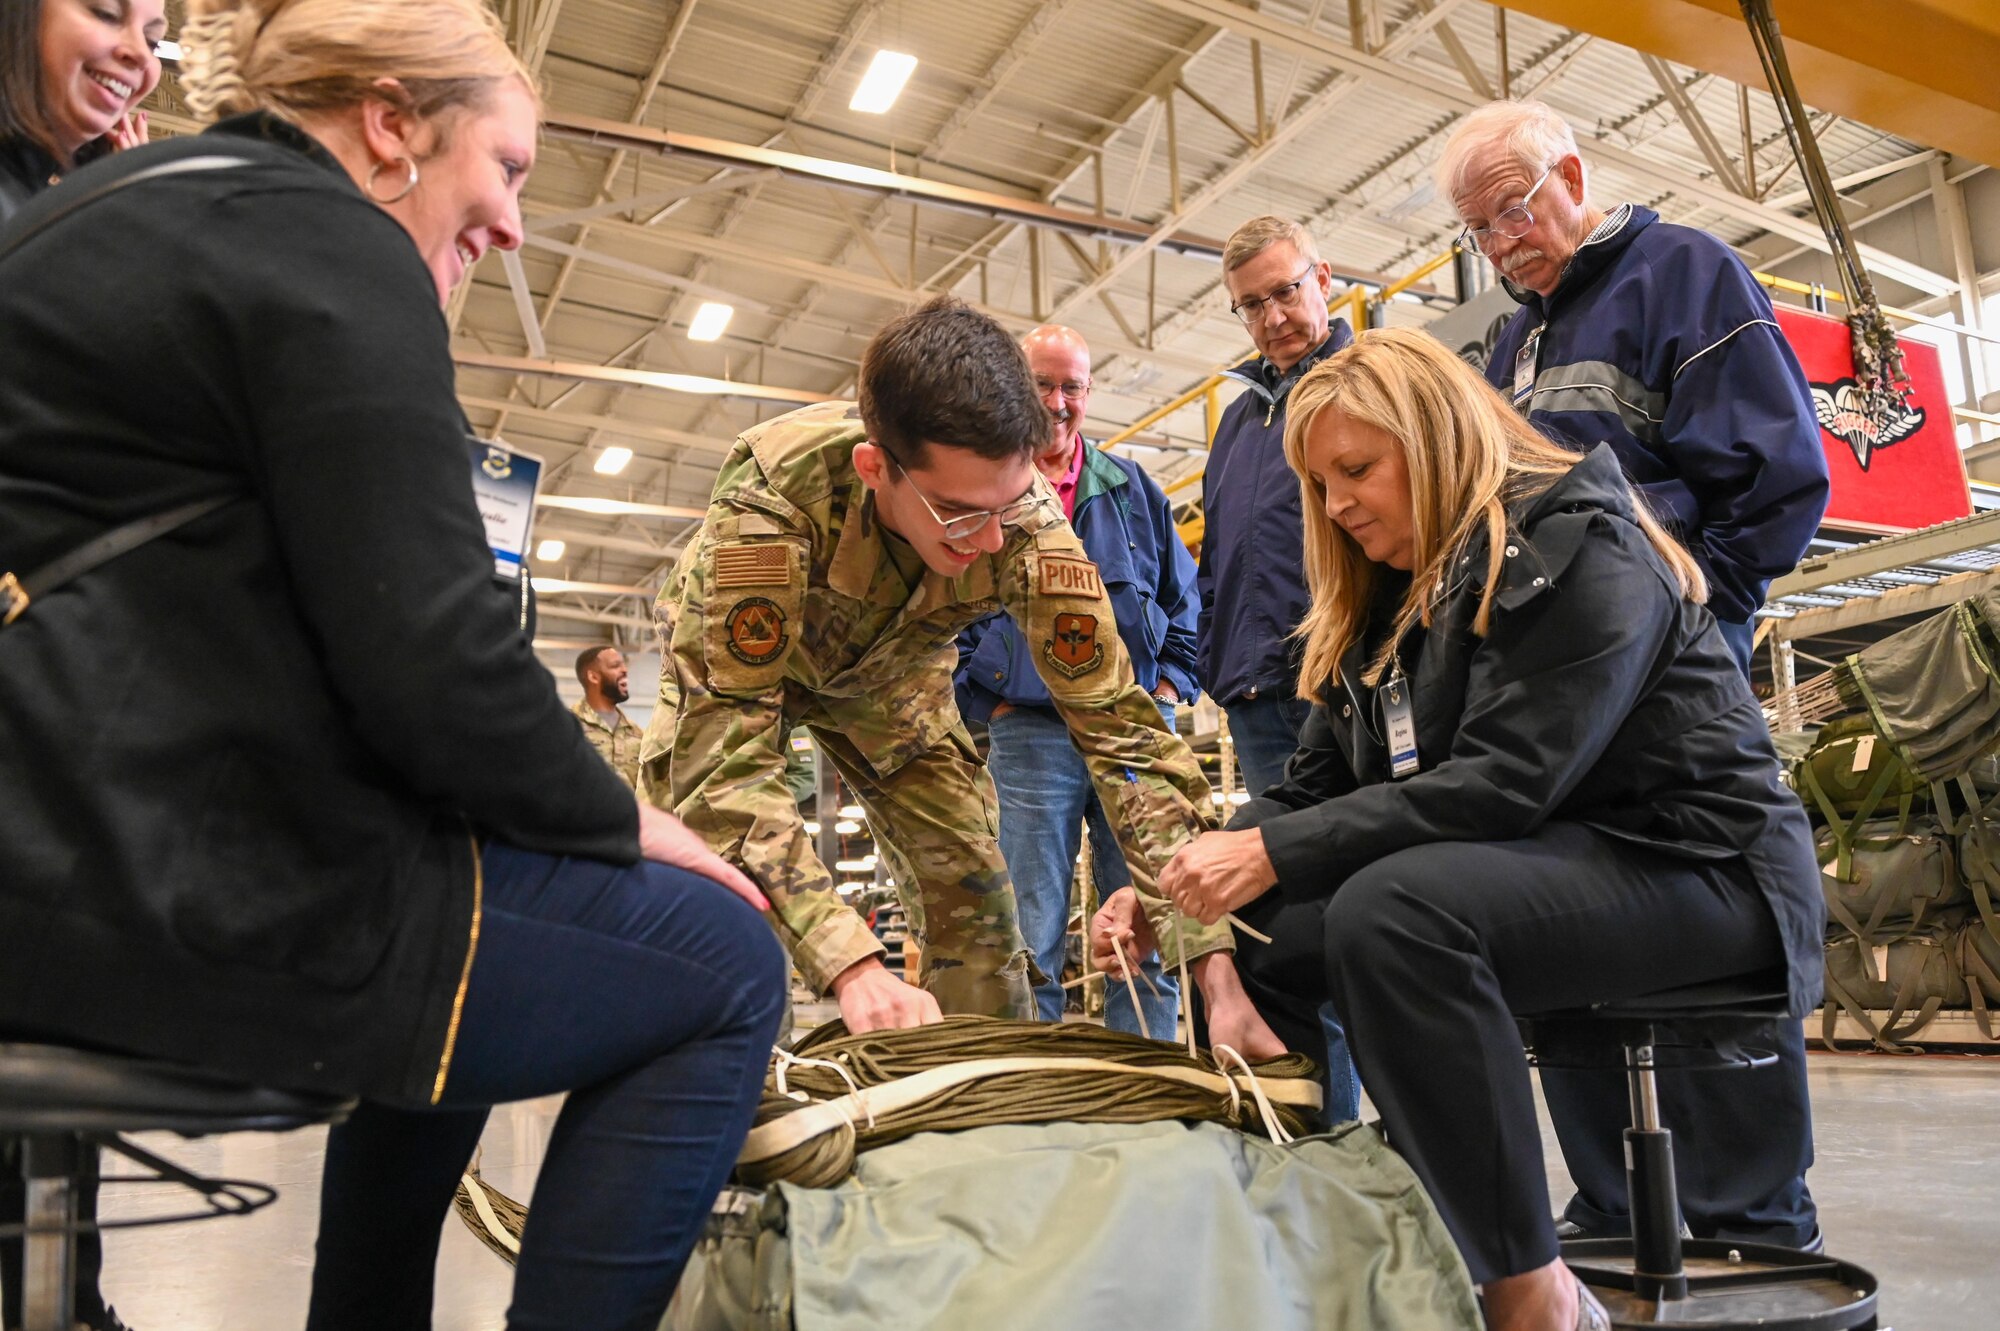 U.S. Air Force Airman First Class Drake O'Neal, 97th Logistics Readiness Squadron unilateral aircrew training rigging member, shows Air Mobility Command civic leaders how to pack a cargo parachute at Altus Air Force Base, Oklahoma, April 27, 2023. The 97th LRS ‘Port Dawgs’ pack parachutes and create pallets to support the mobility mission at Altus AFB. (U.S. Air Force photo by Senior Airman Kayla Christenson)